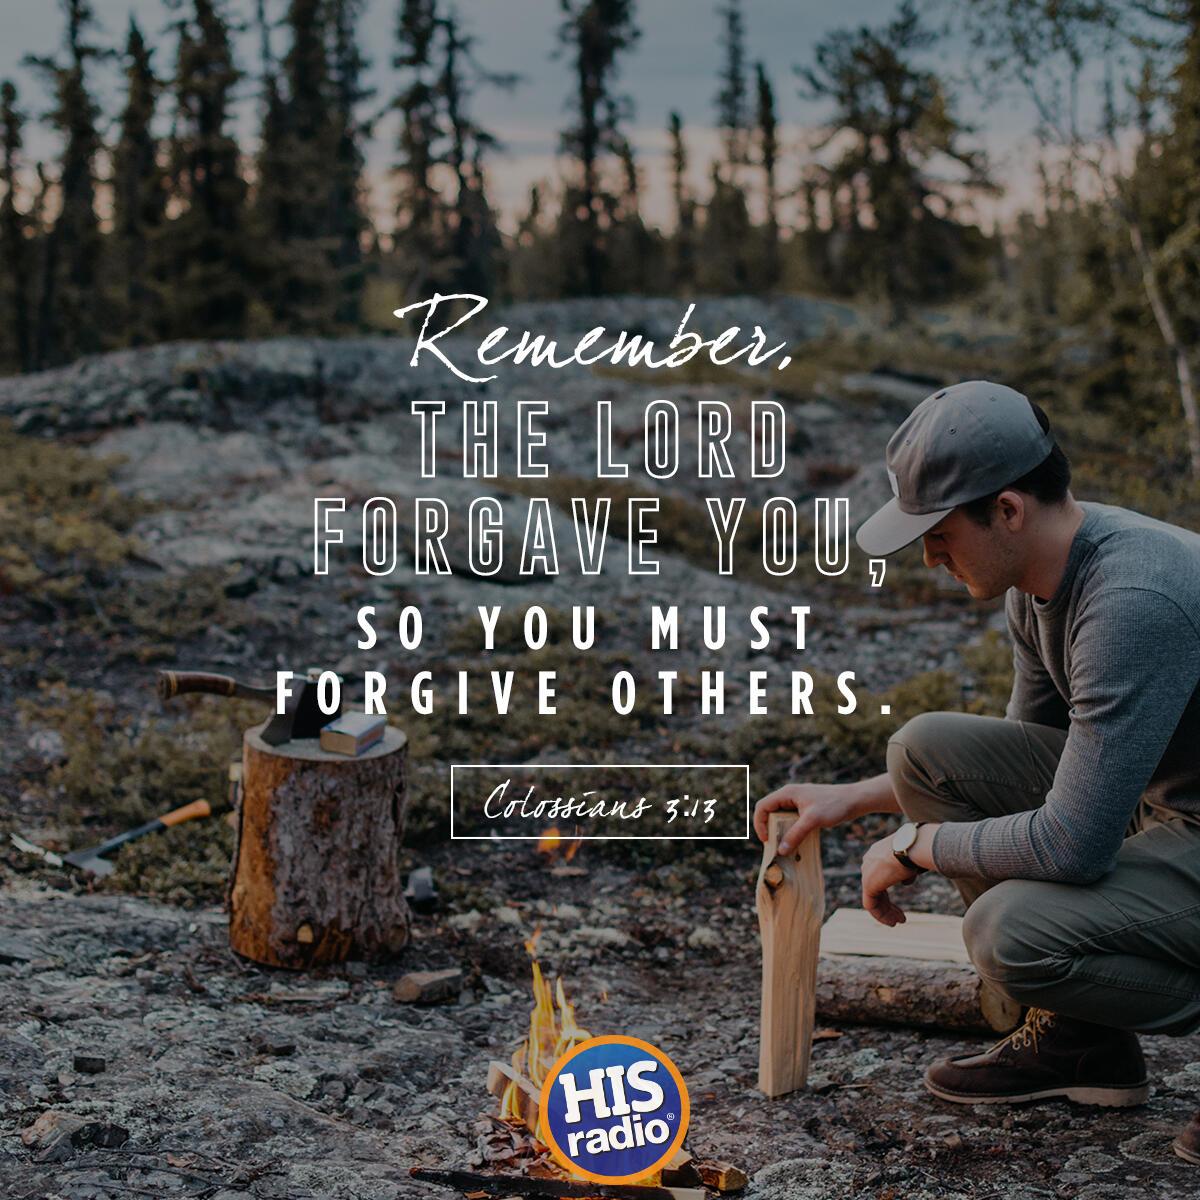 Colossians 3:13 - Verse of the Day